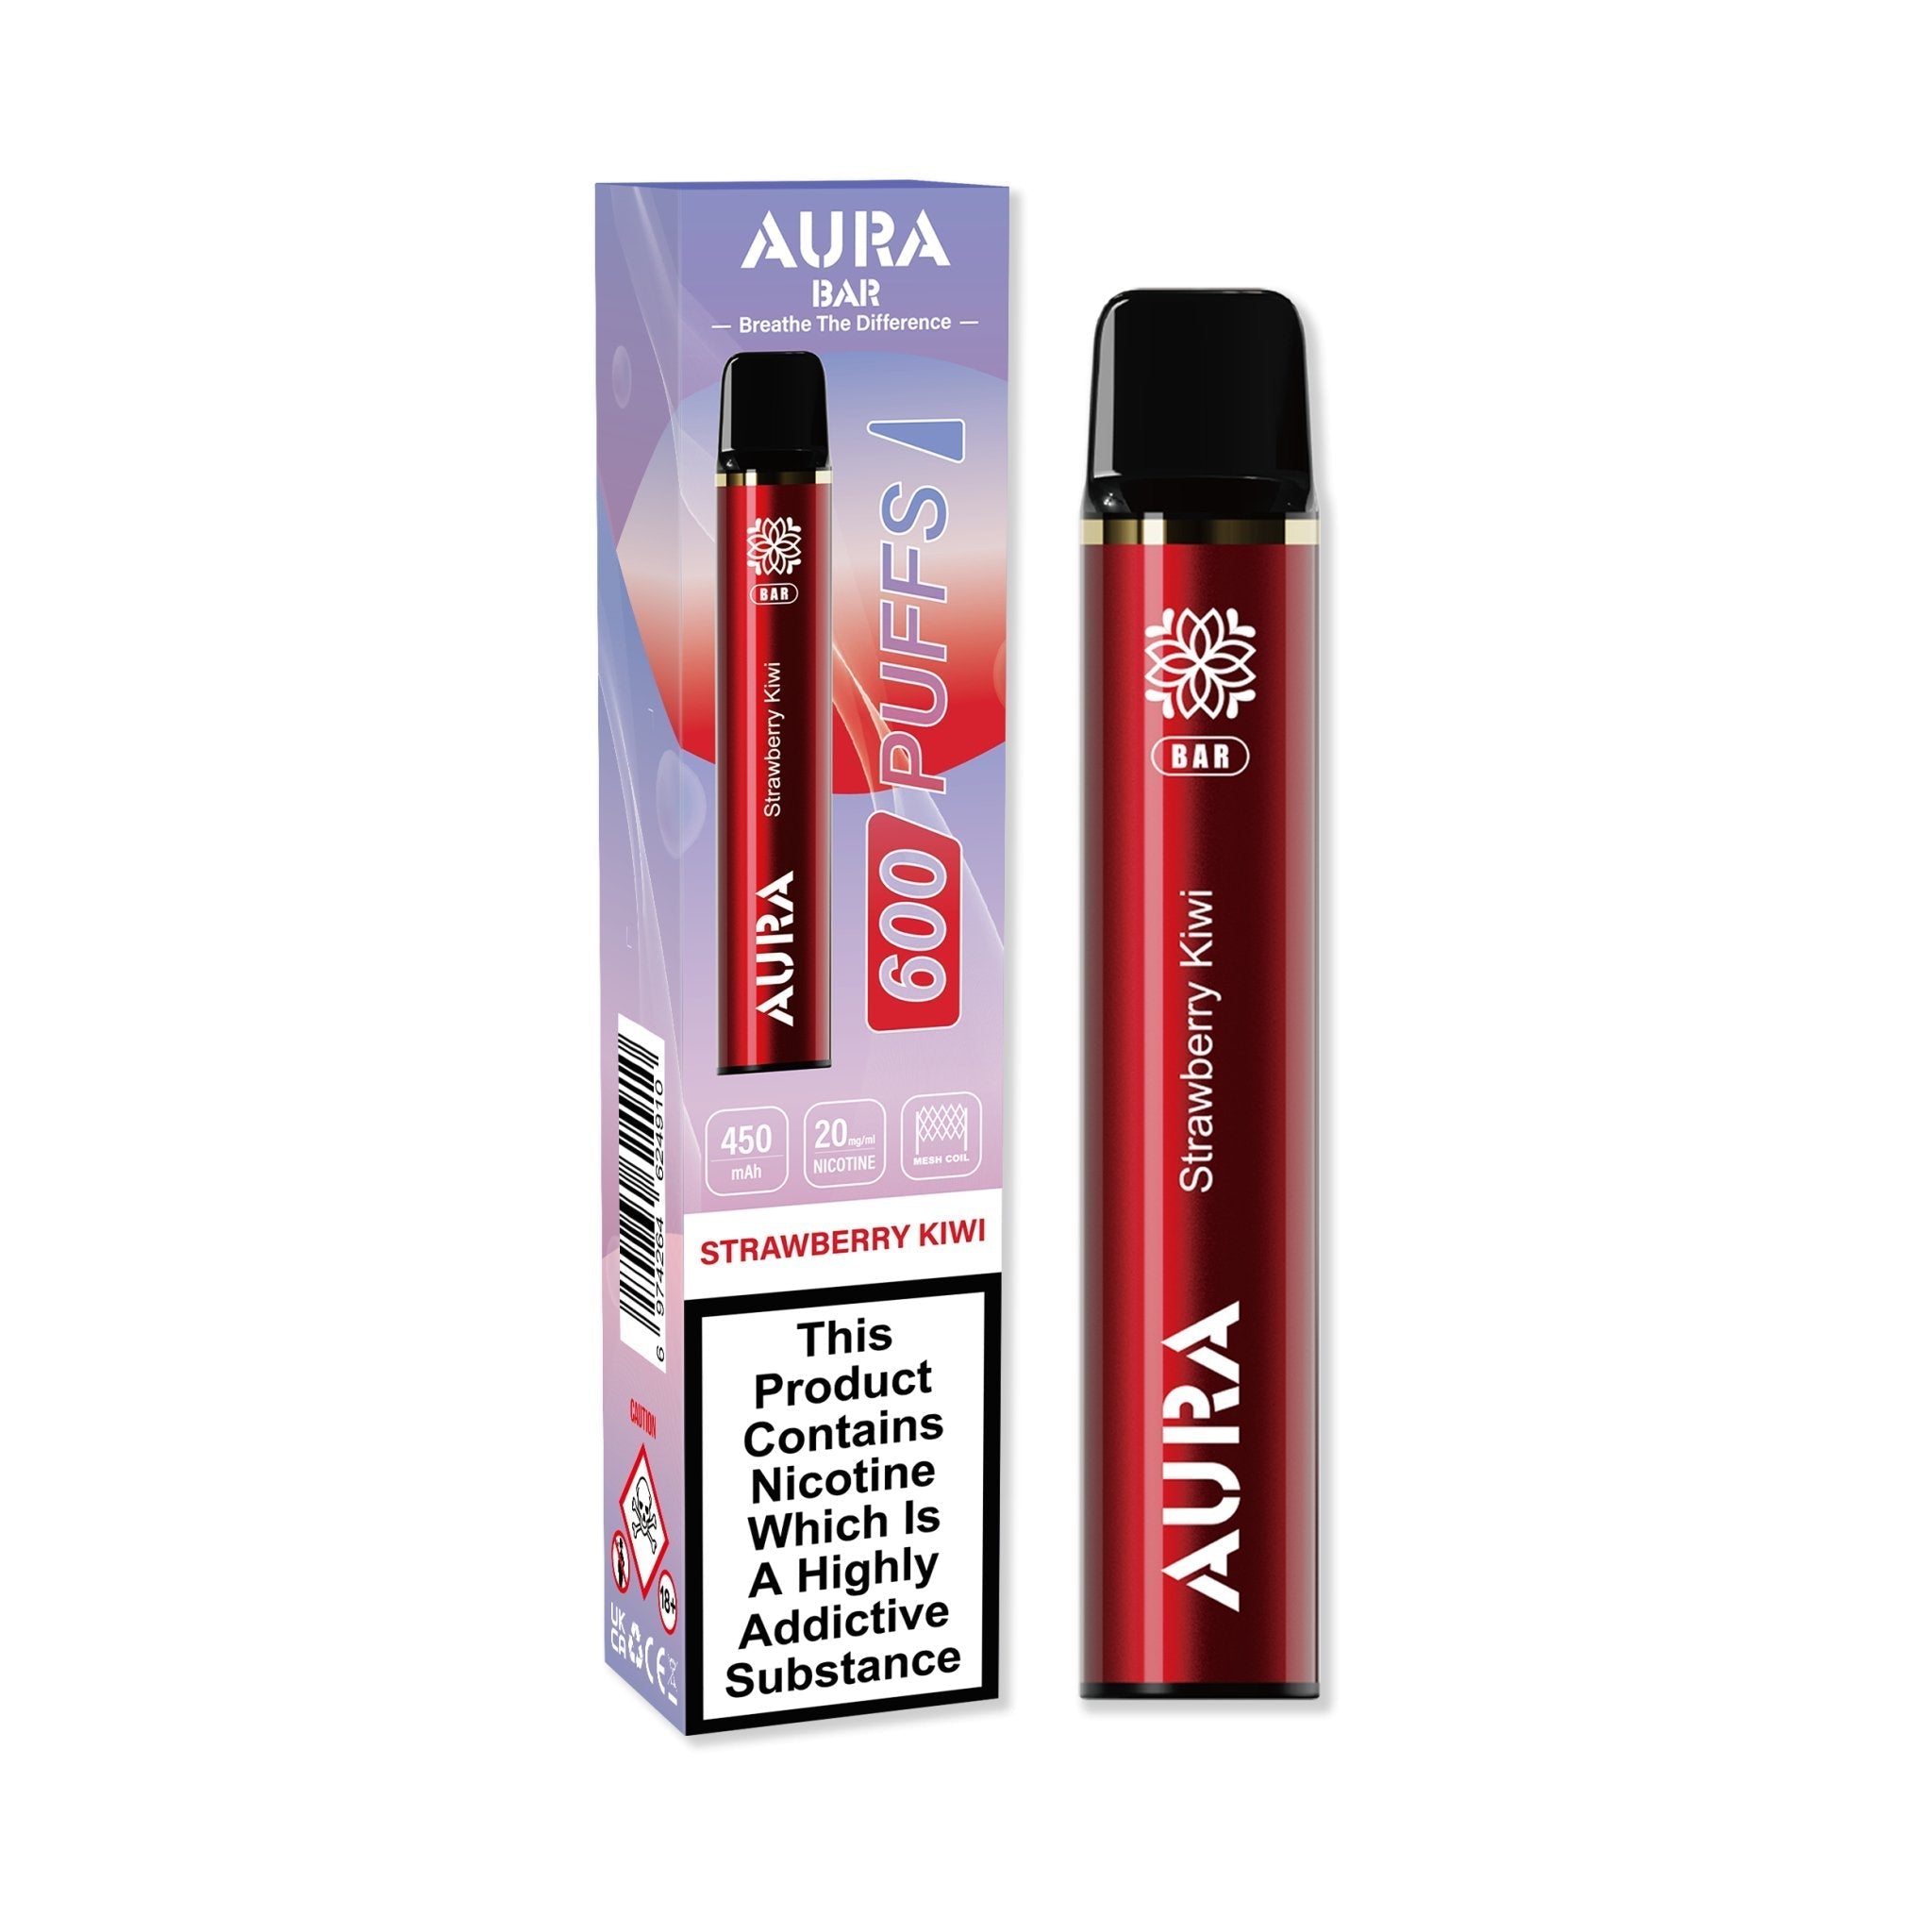 Aura Bar 600 Puffs Disposable Vape By Crystal Prime - Wolfvapes.co.uk-Strawberry Kiwi